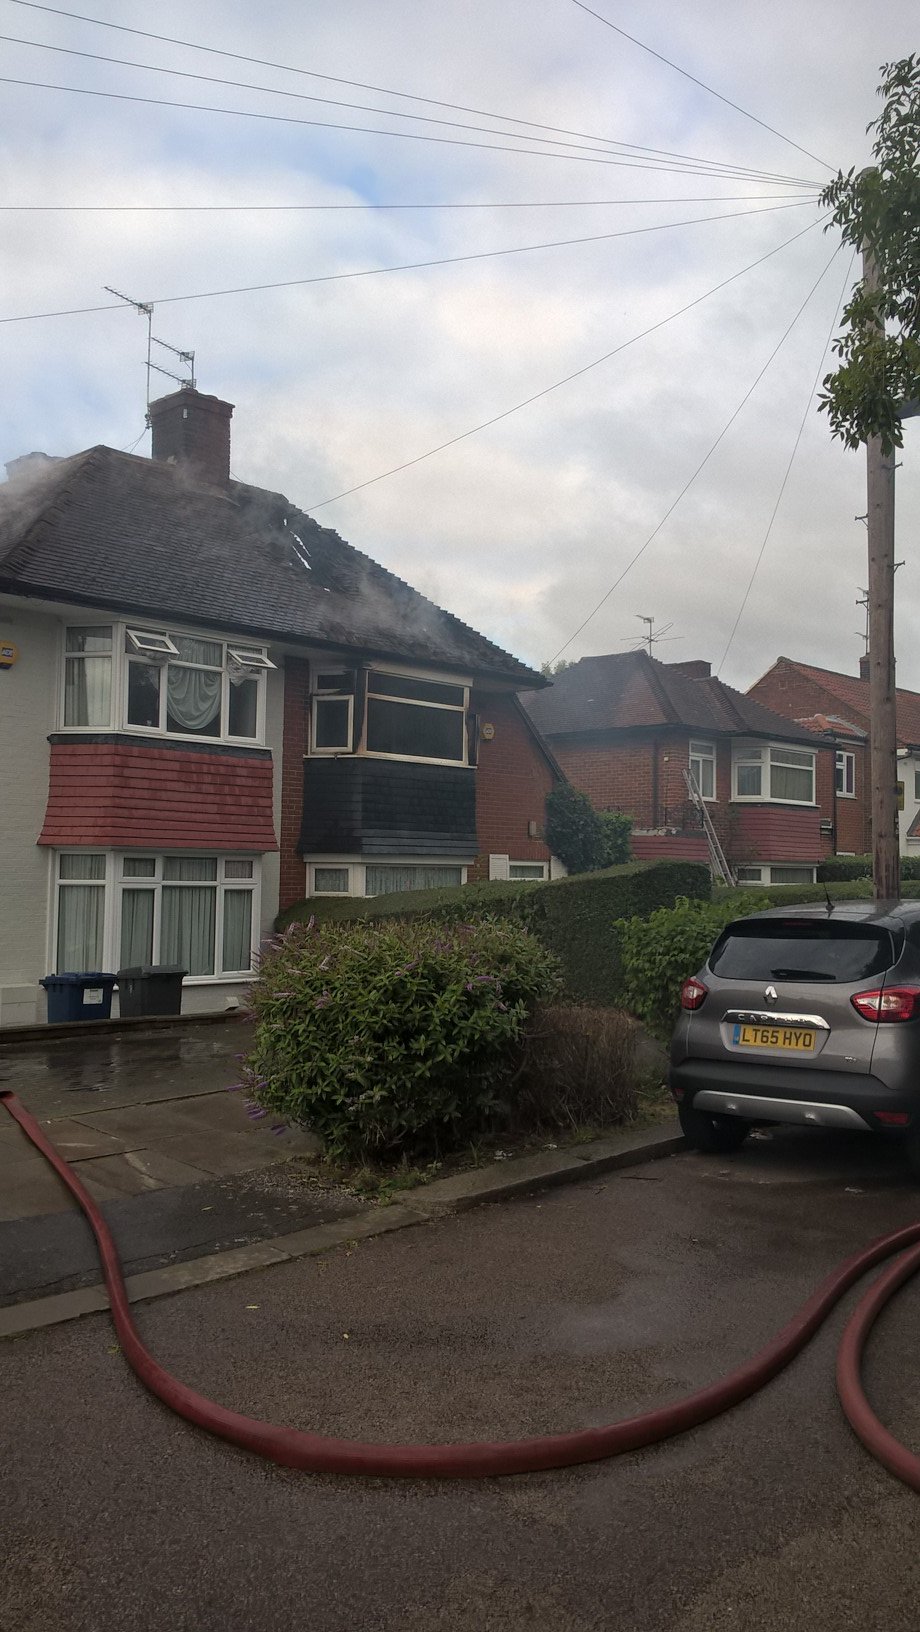 No one harmed in mystery house fire